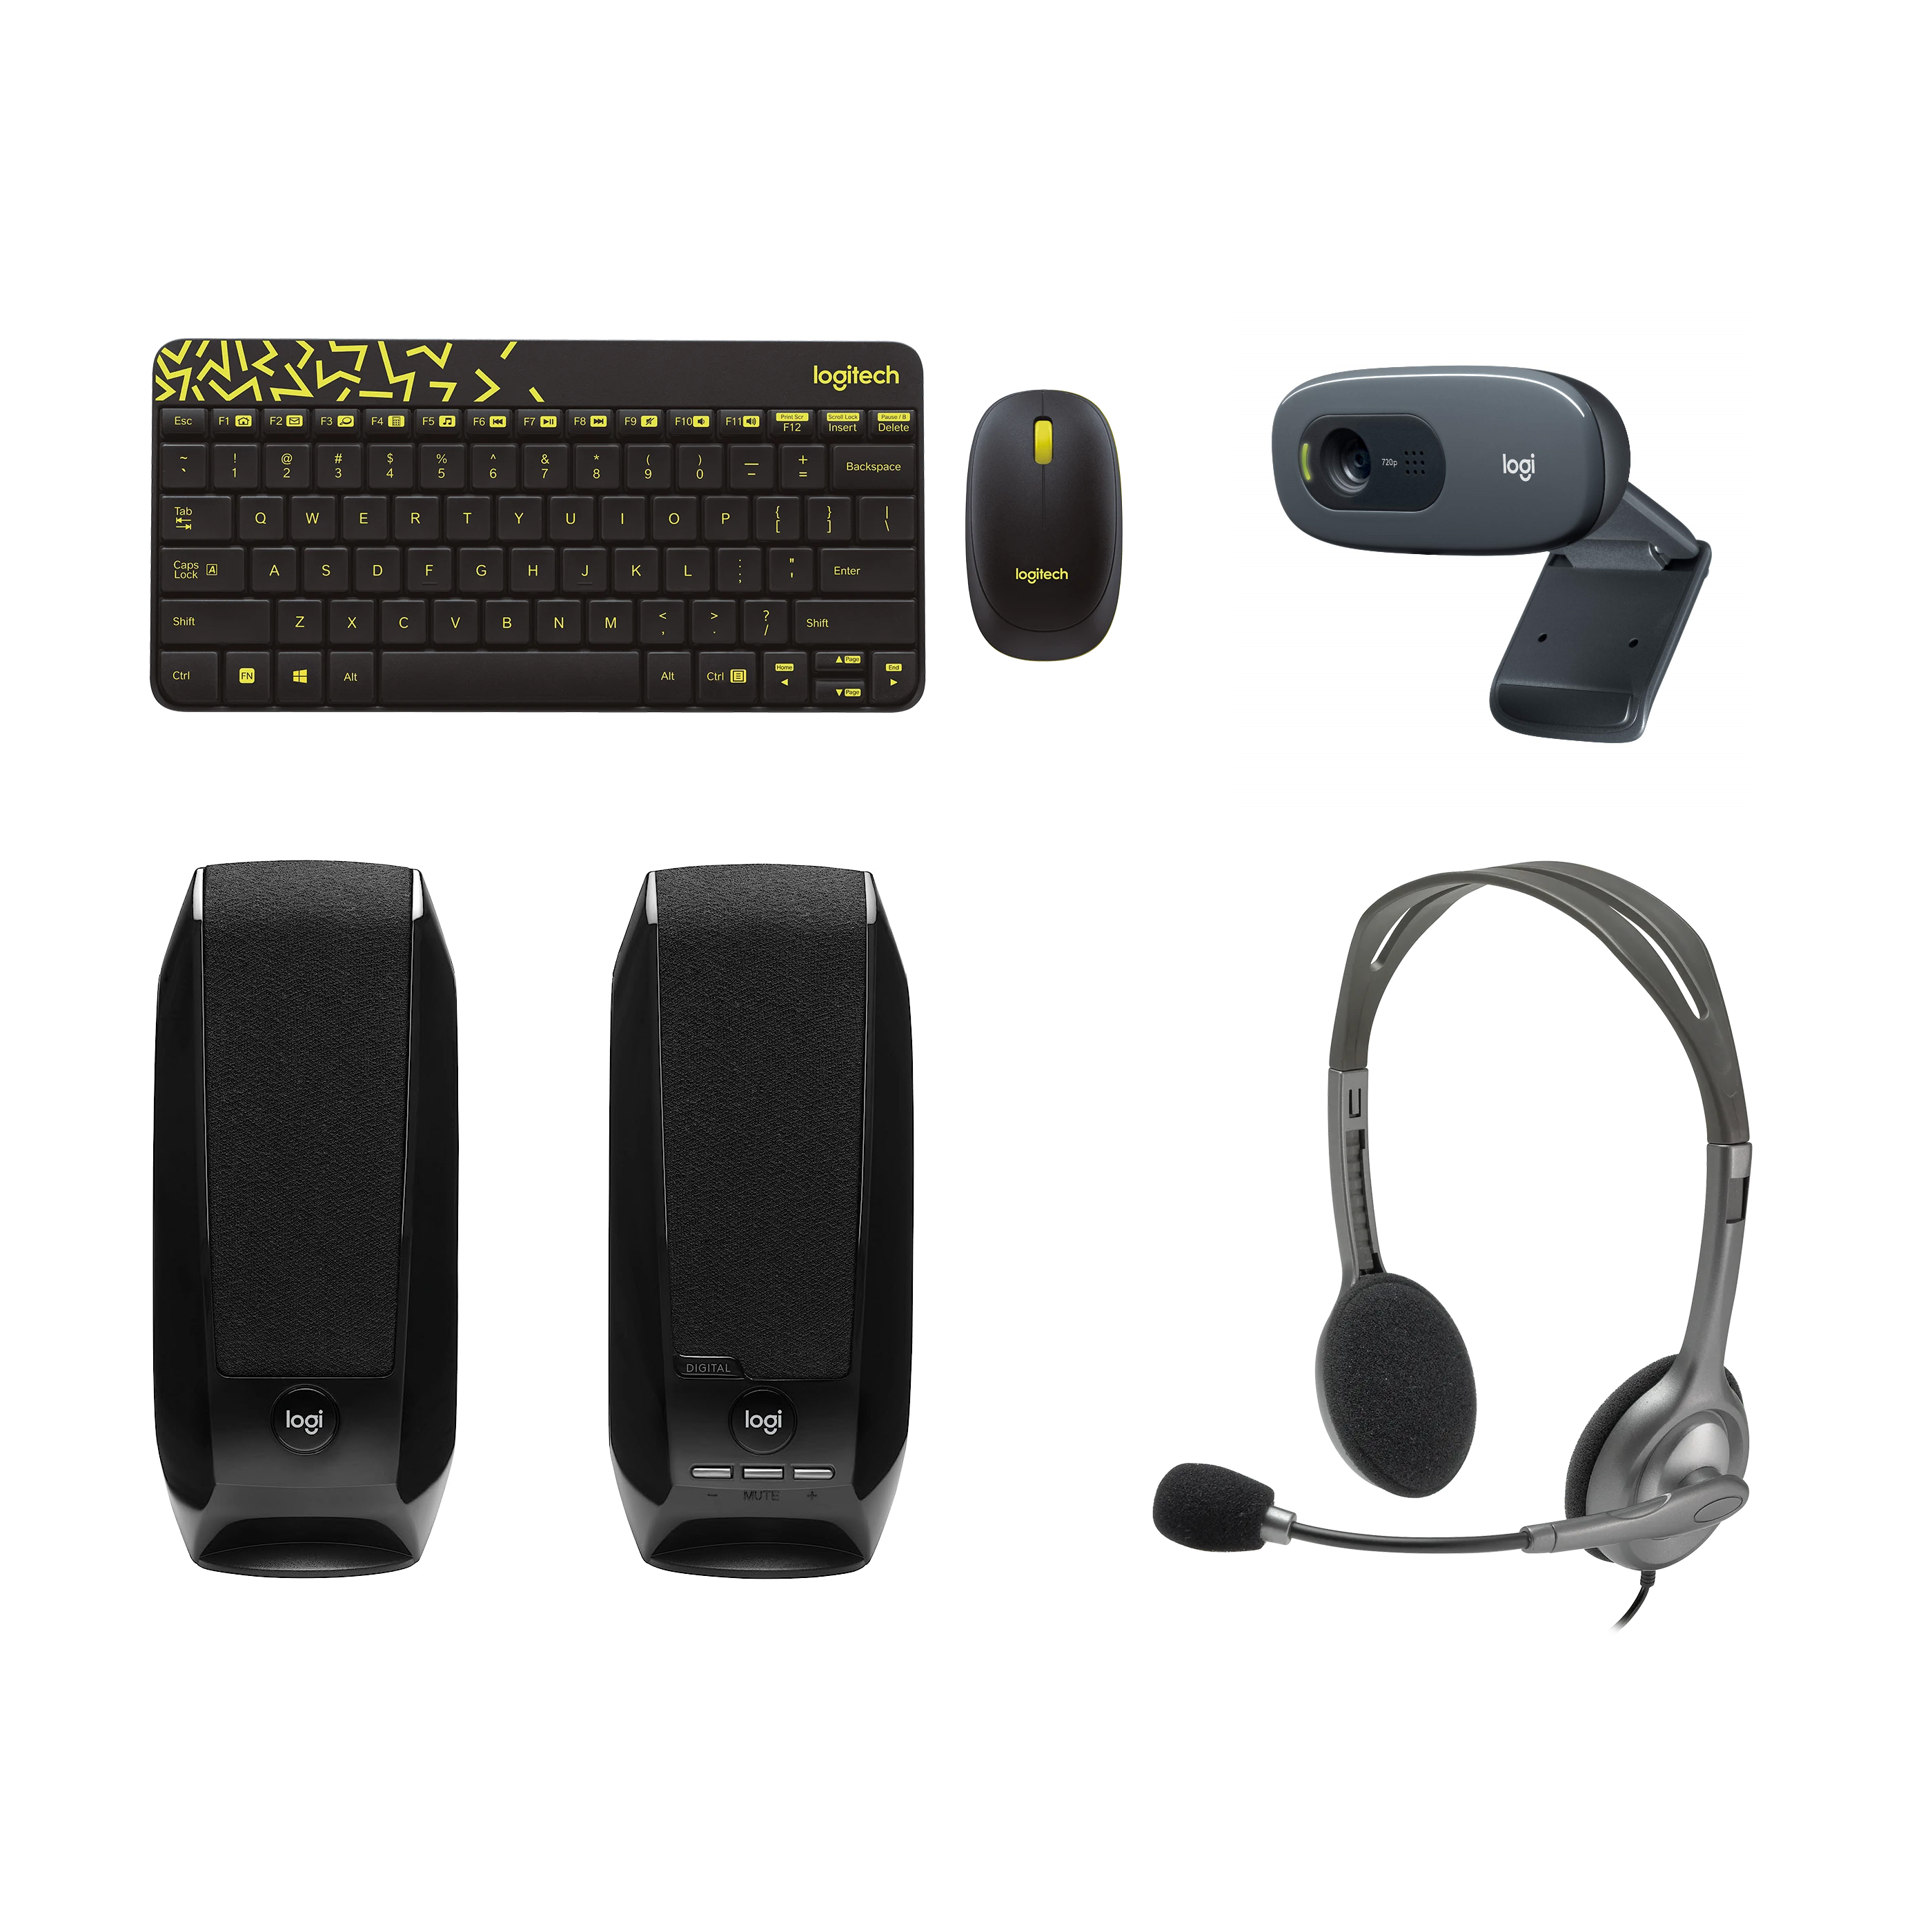 Logitech MK240 Wireless Keyboard and Mouse & C270 HD Webcam & S 150 USB Speaker with H110 Stereo Headset Combo